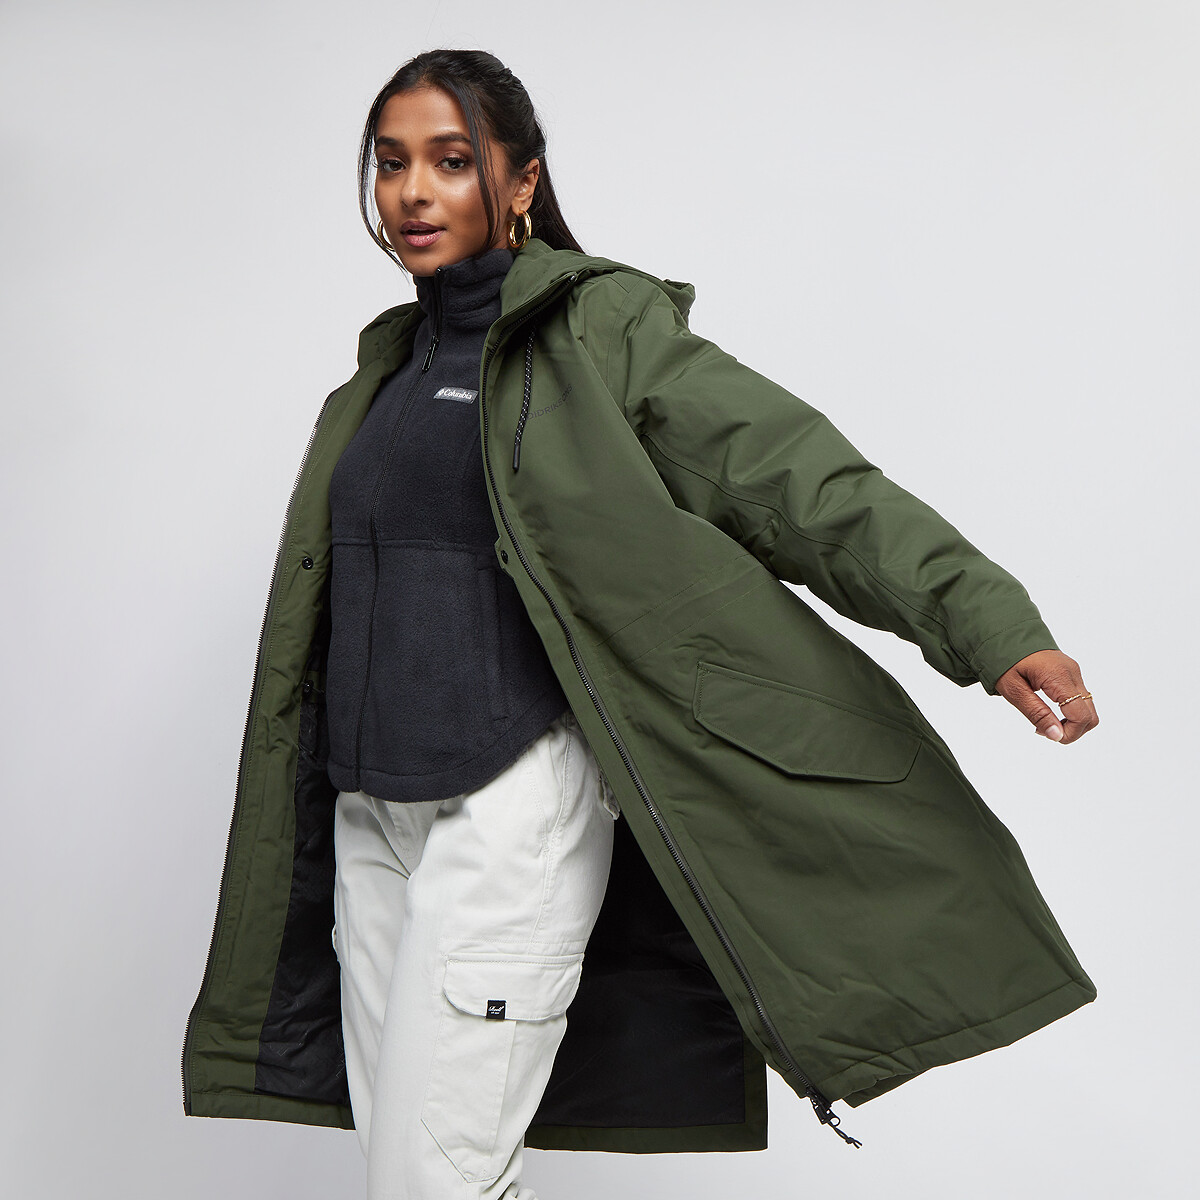 Buy Didriksons Marta-Lisa Parka deep green from £100.00 (Today) – Best  Deals on